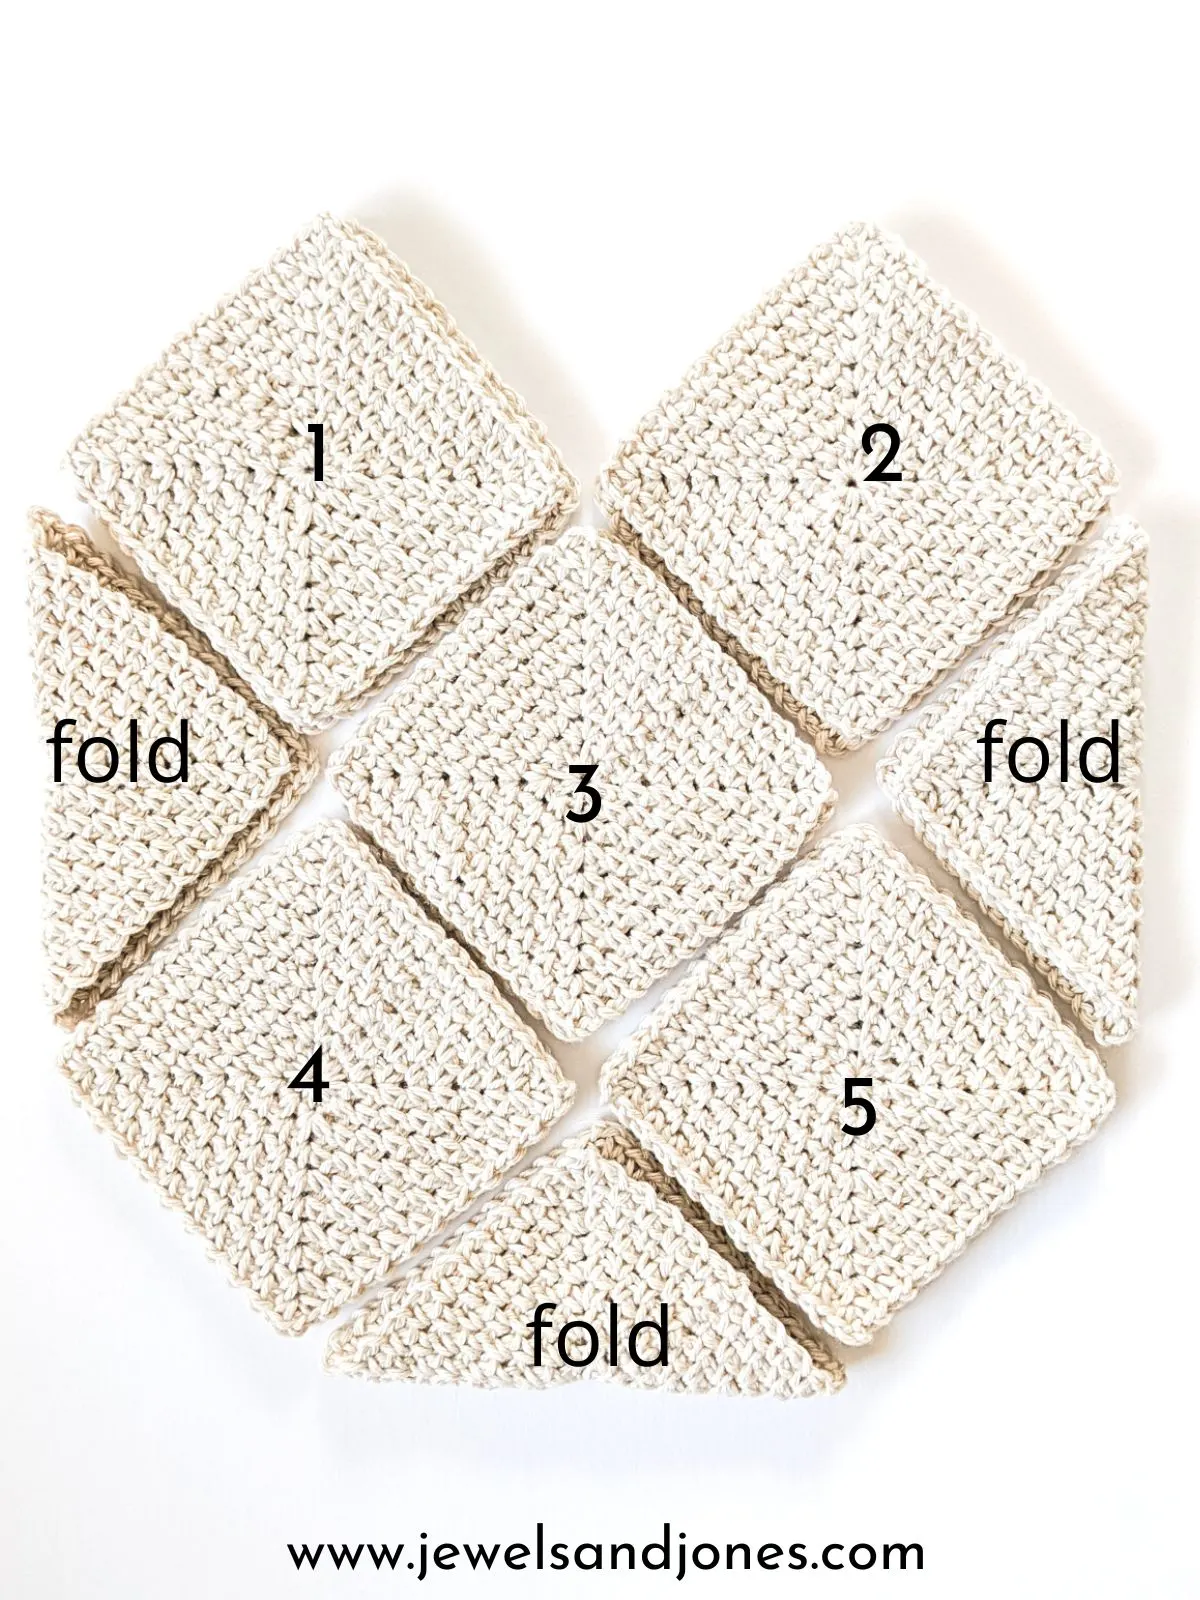 Image shows an incomplete granny square bag.